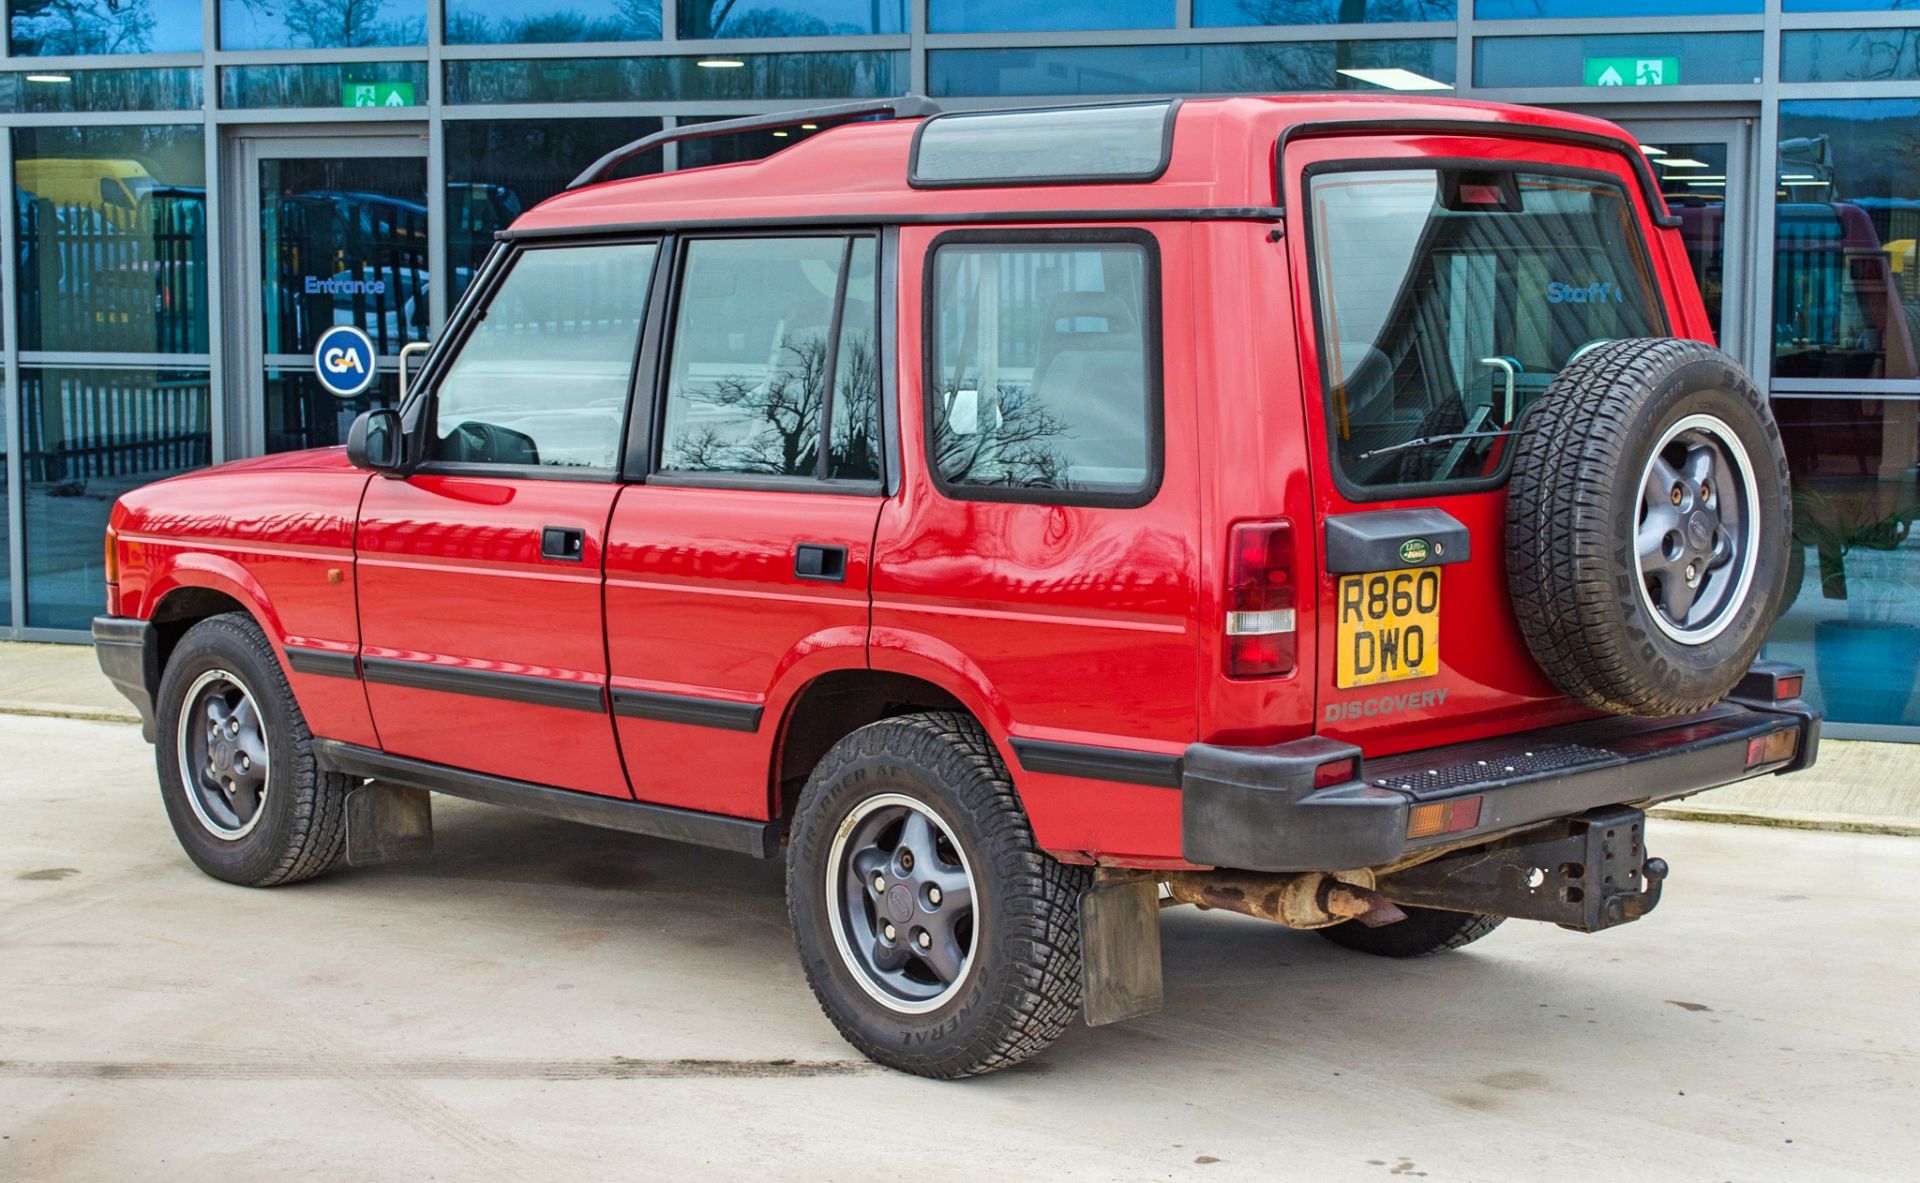 1998 Landrover Discovery 3.9 litre V8 manual 5 door 4wd - Image 8 of 46